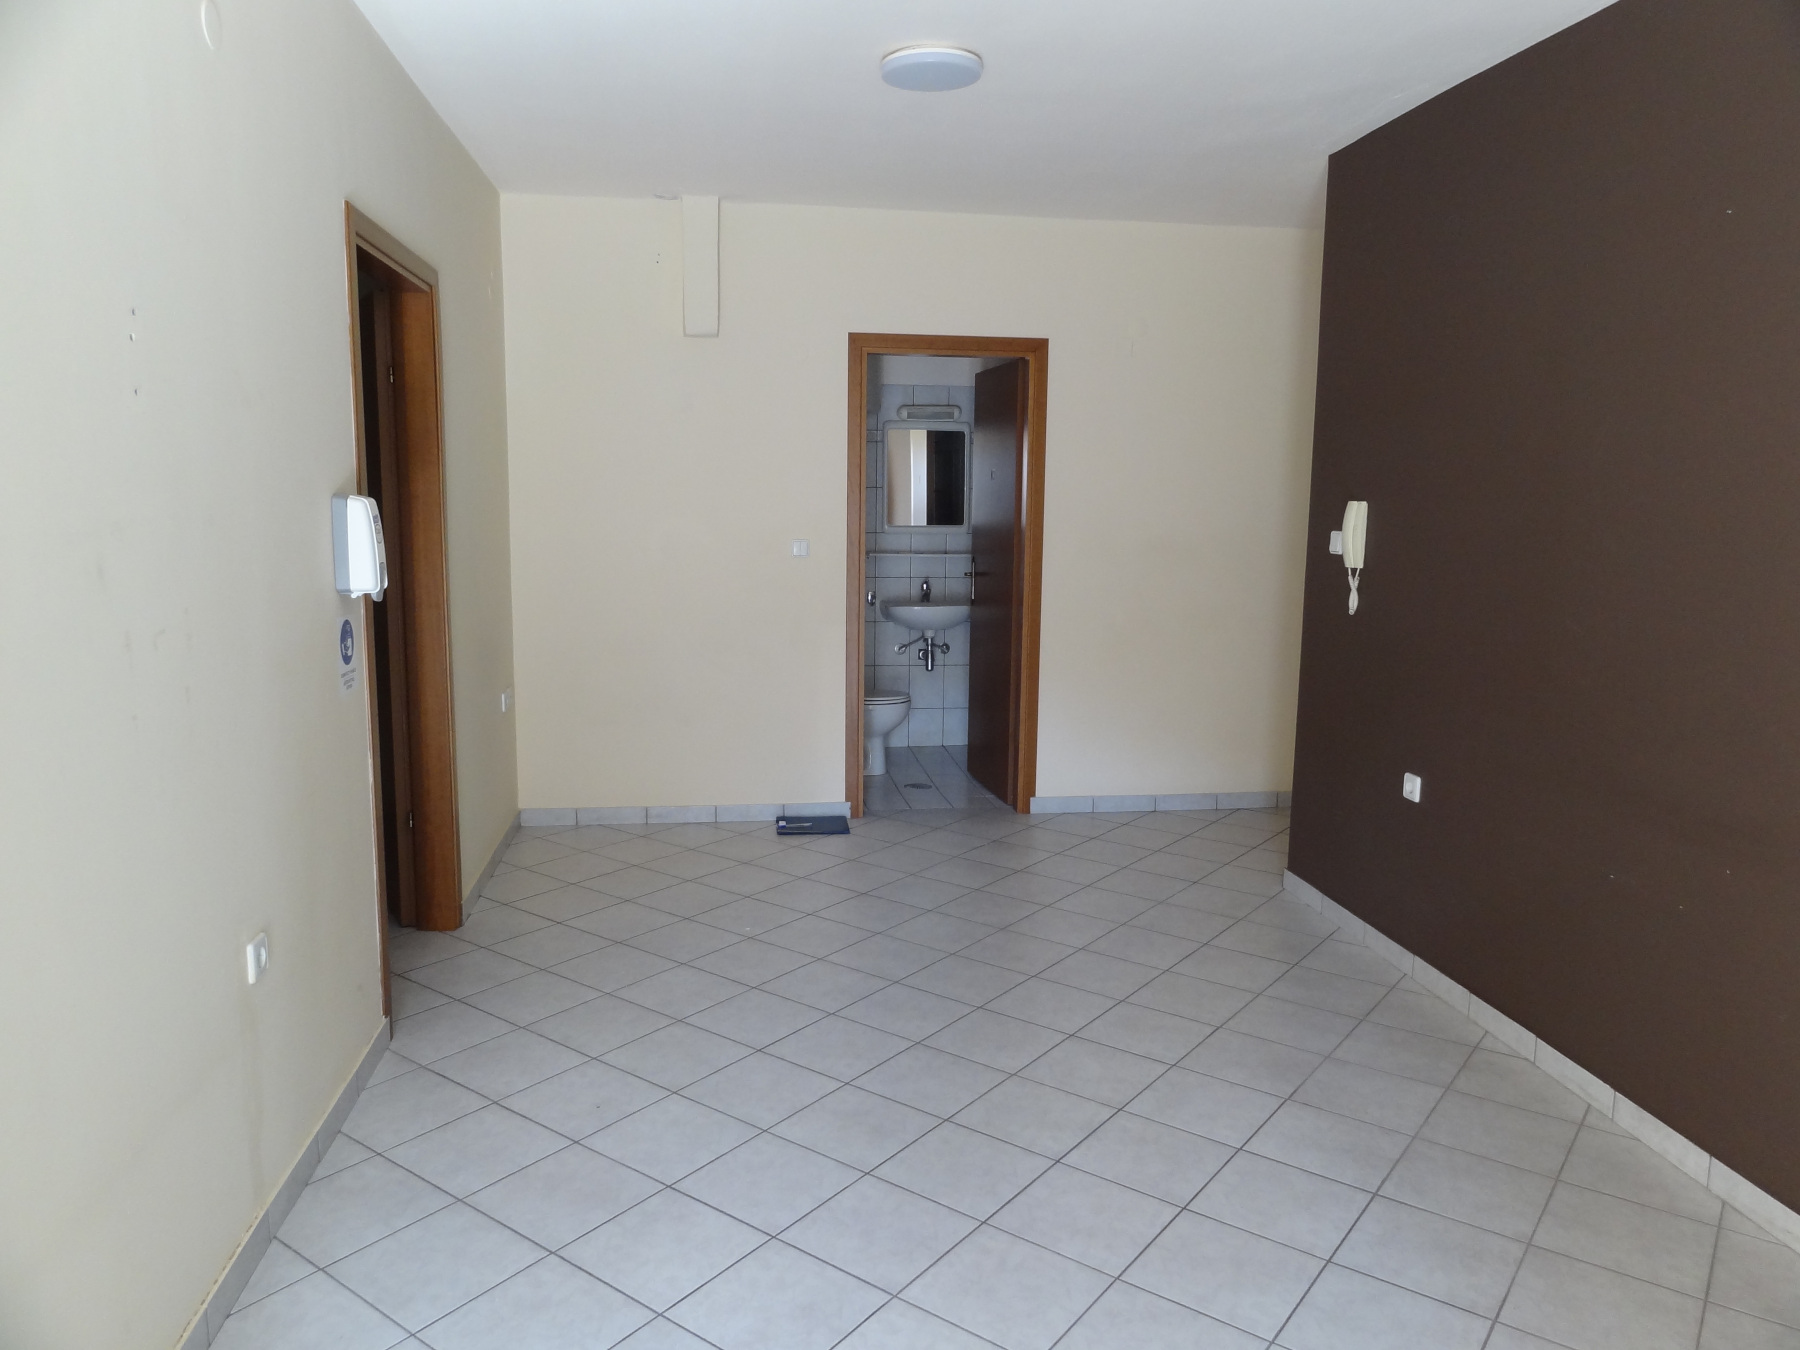 Commercial space for rent, 55 sq.m. 1st floor in a central part of the city of Ioannina